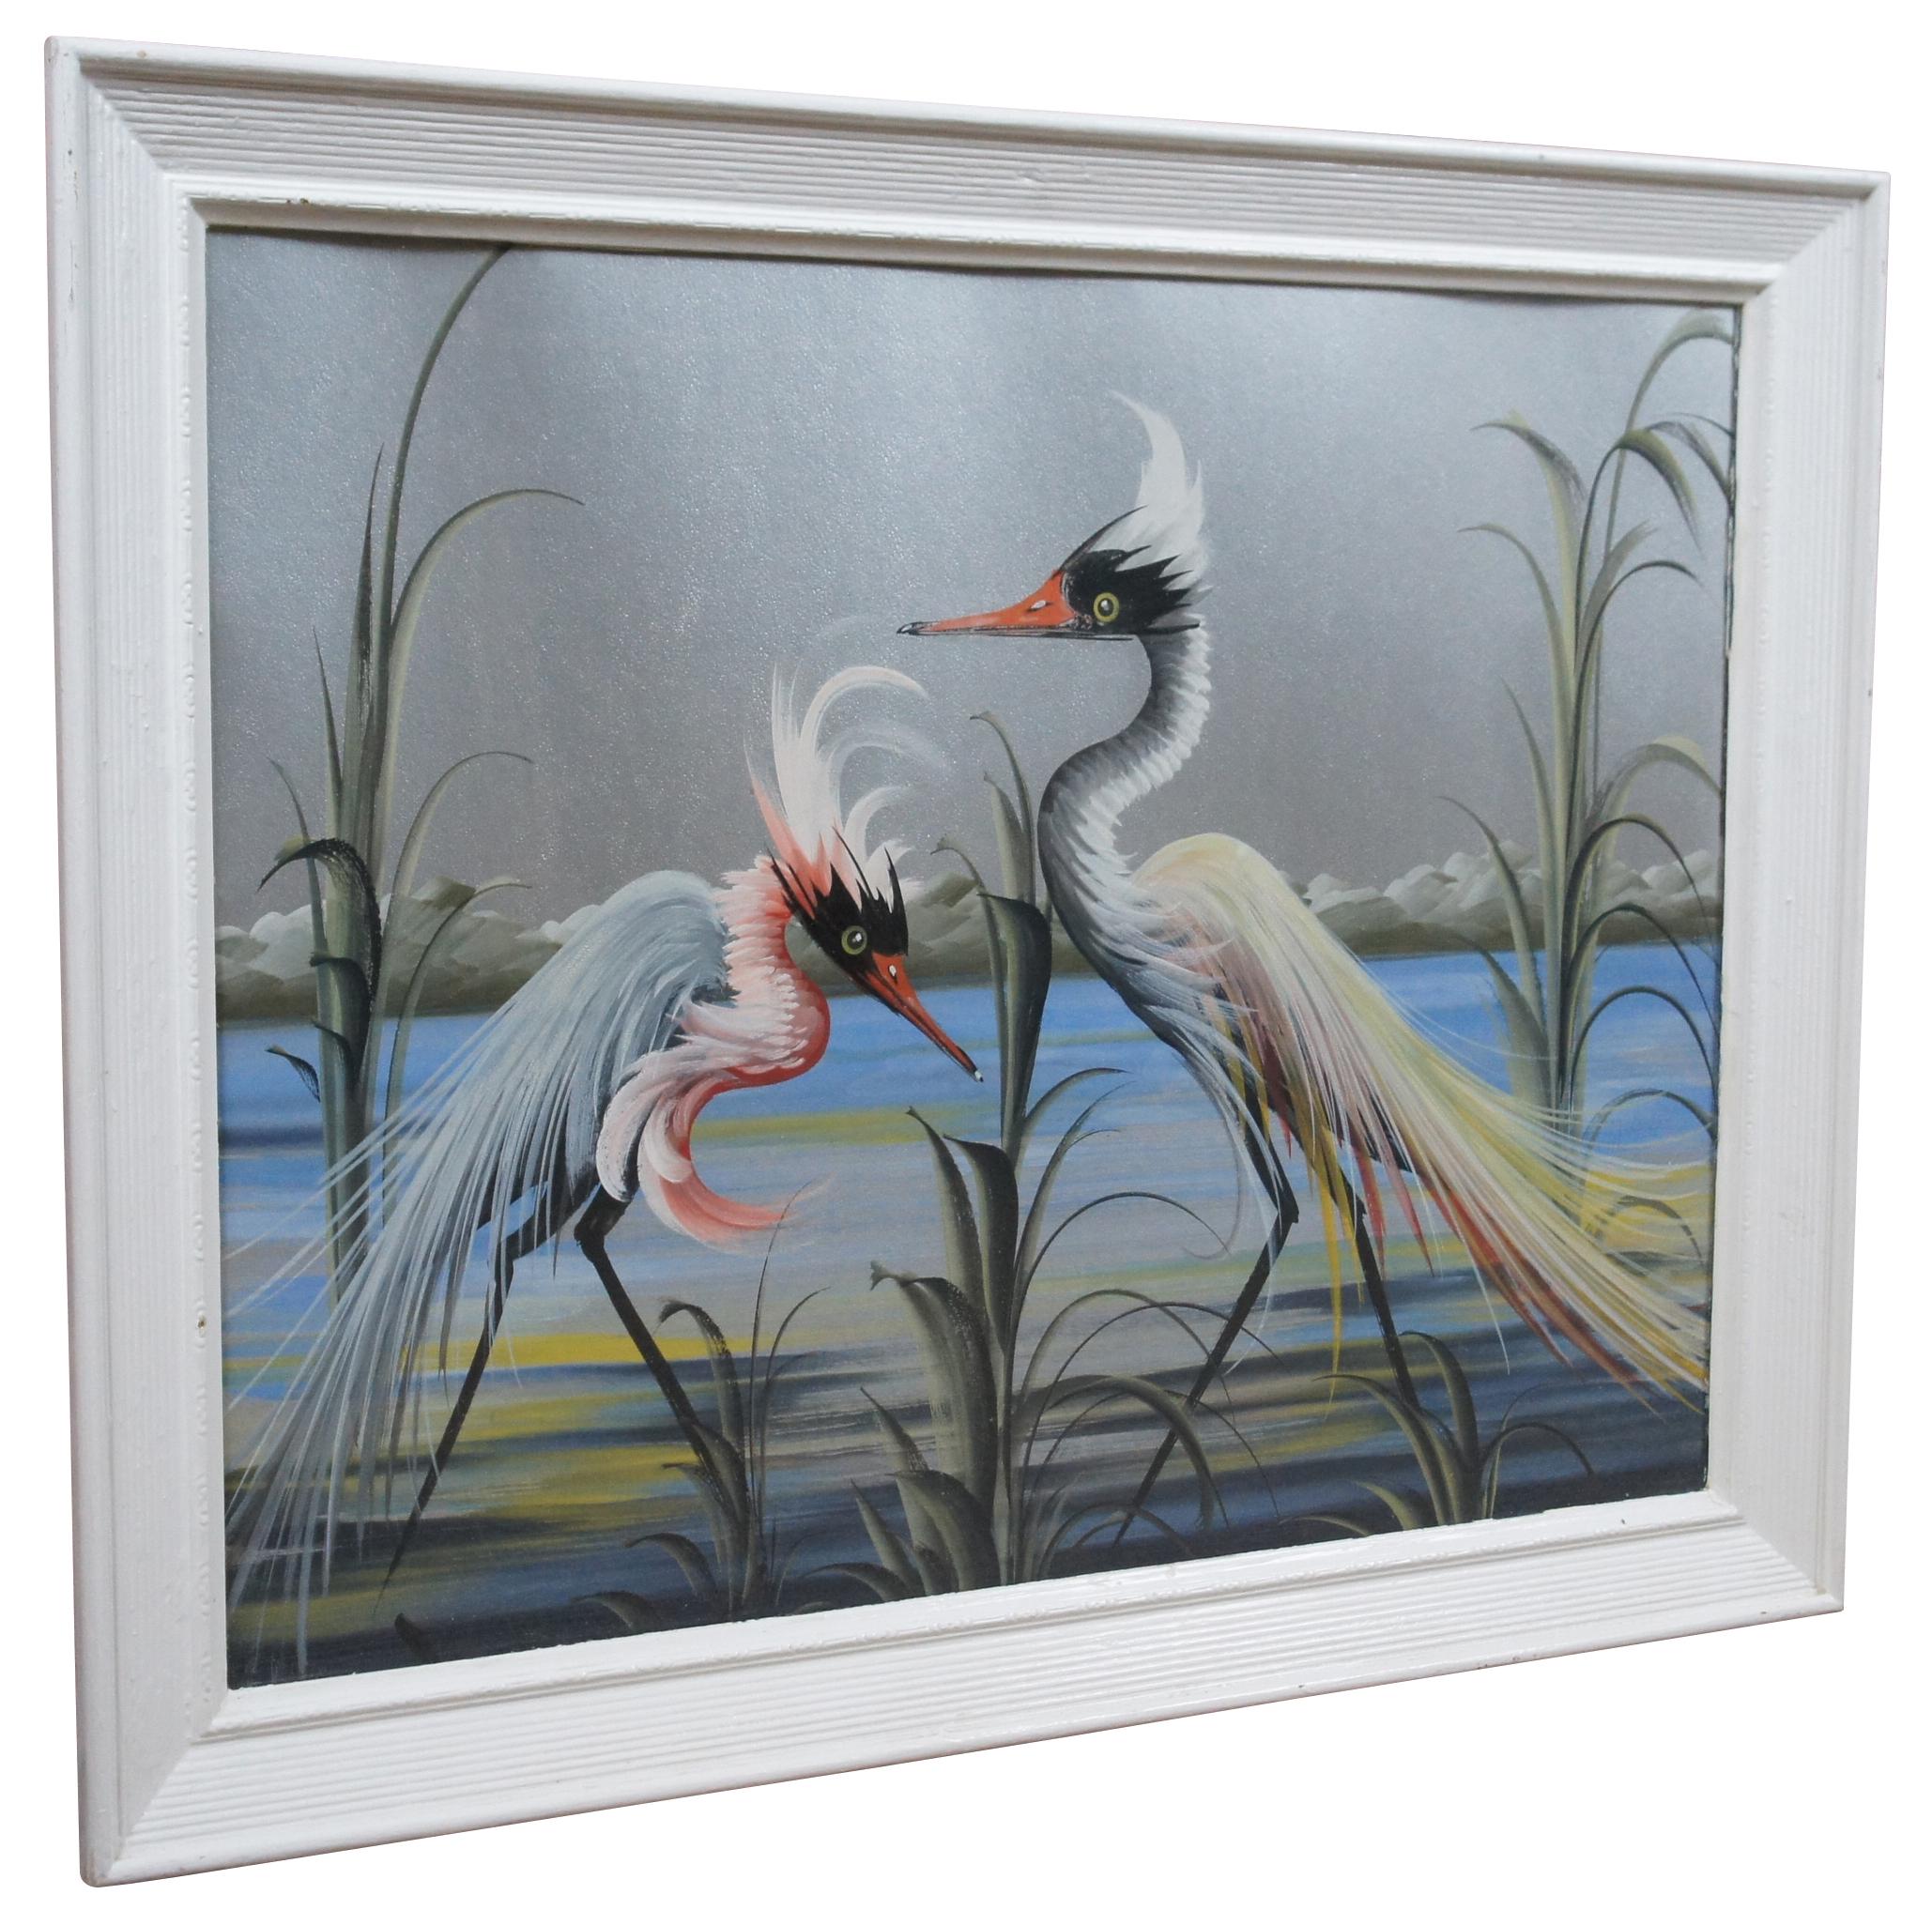 Landscape Painting Portrait of Herons Cranes on Silver Paper Seascape Birds In Good Condition For Sale In Dayton, OH